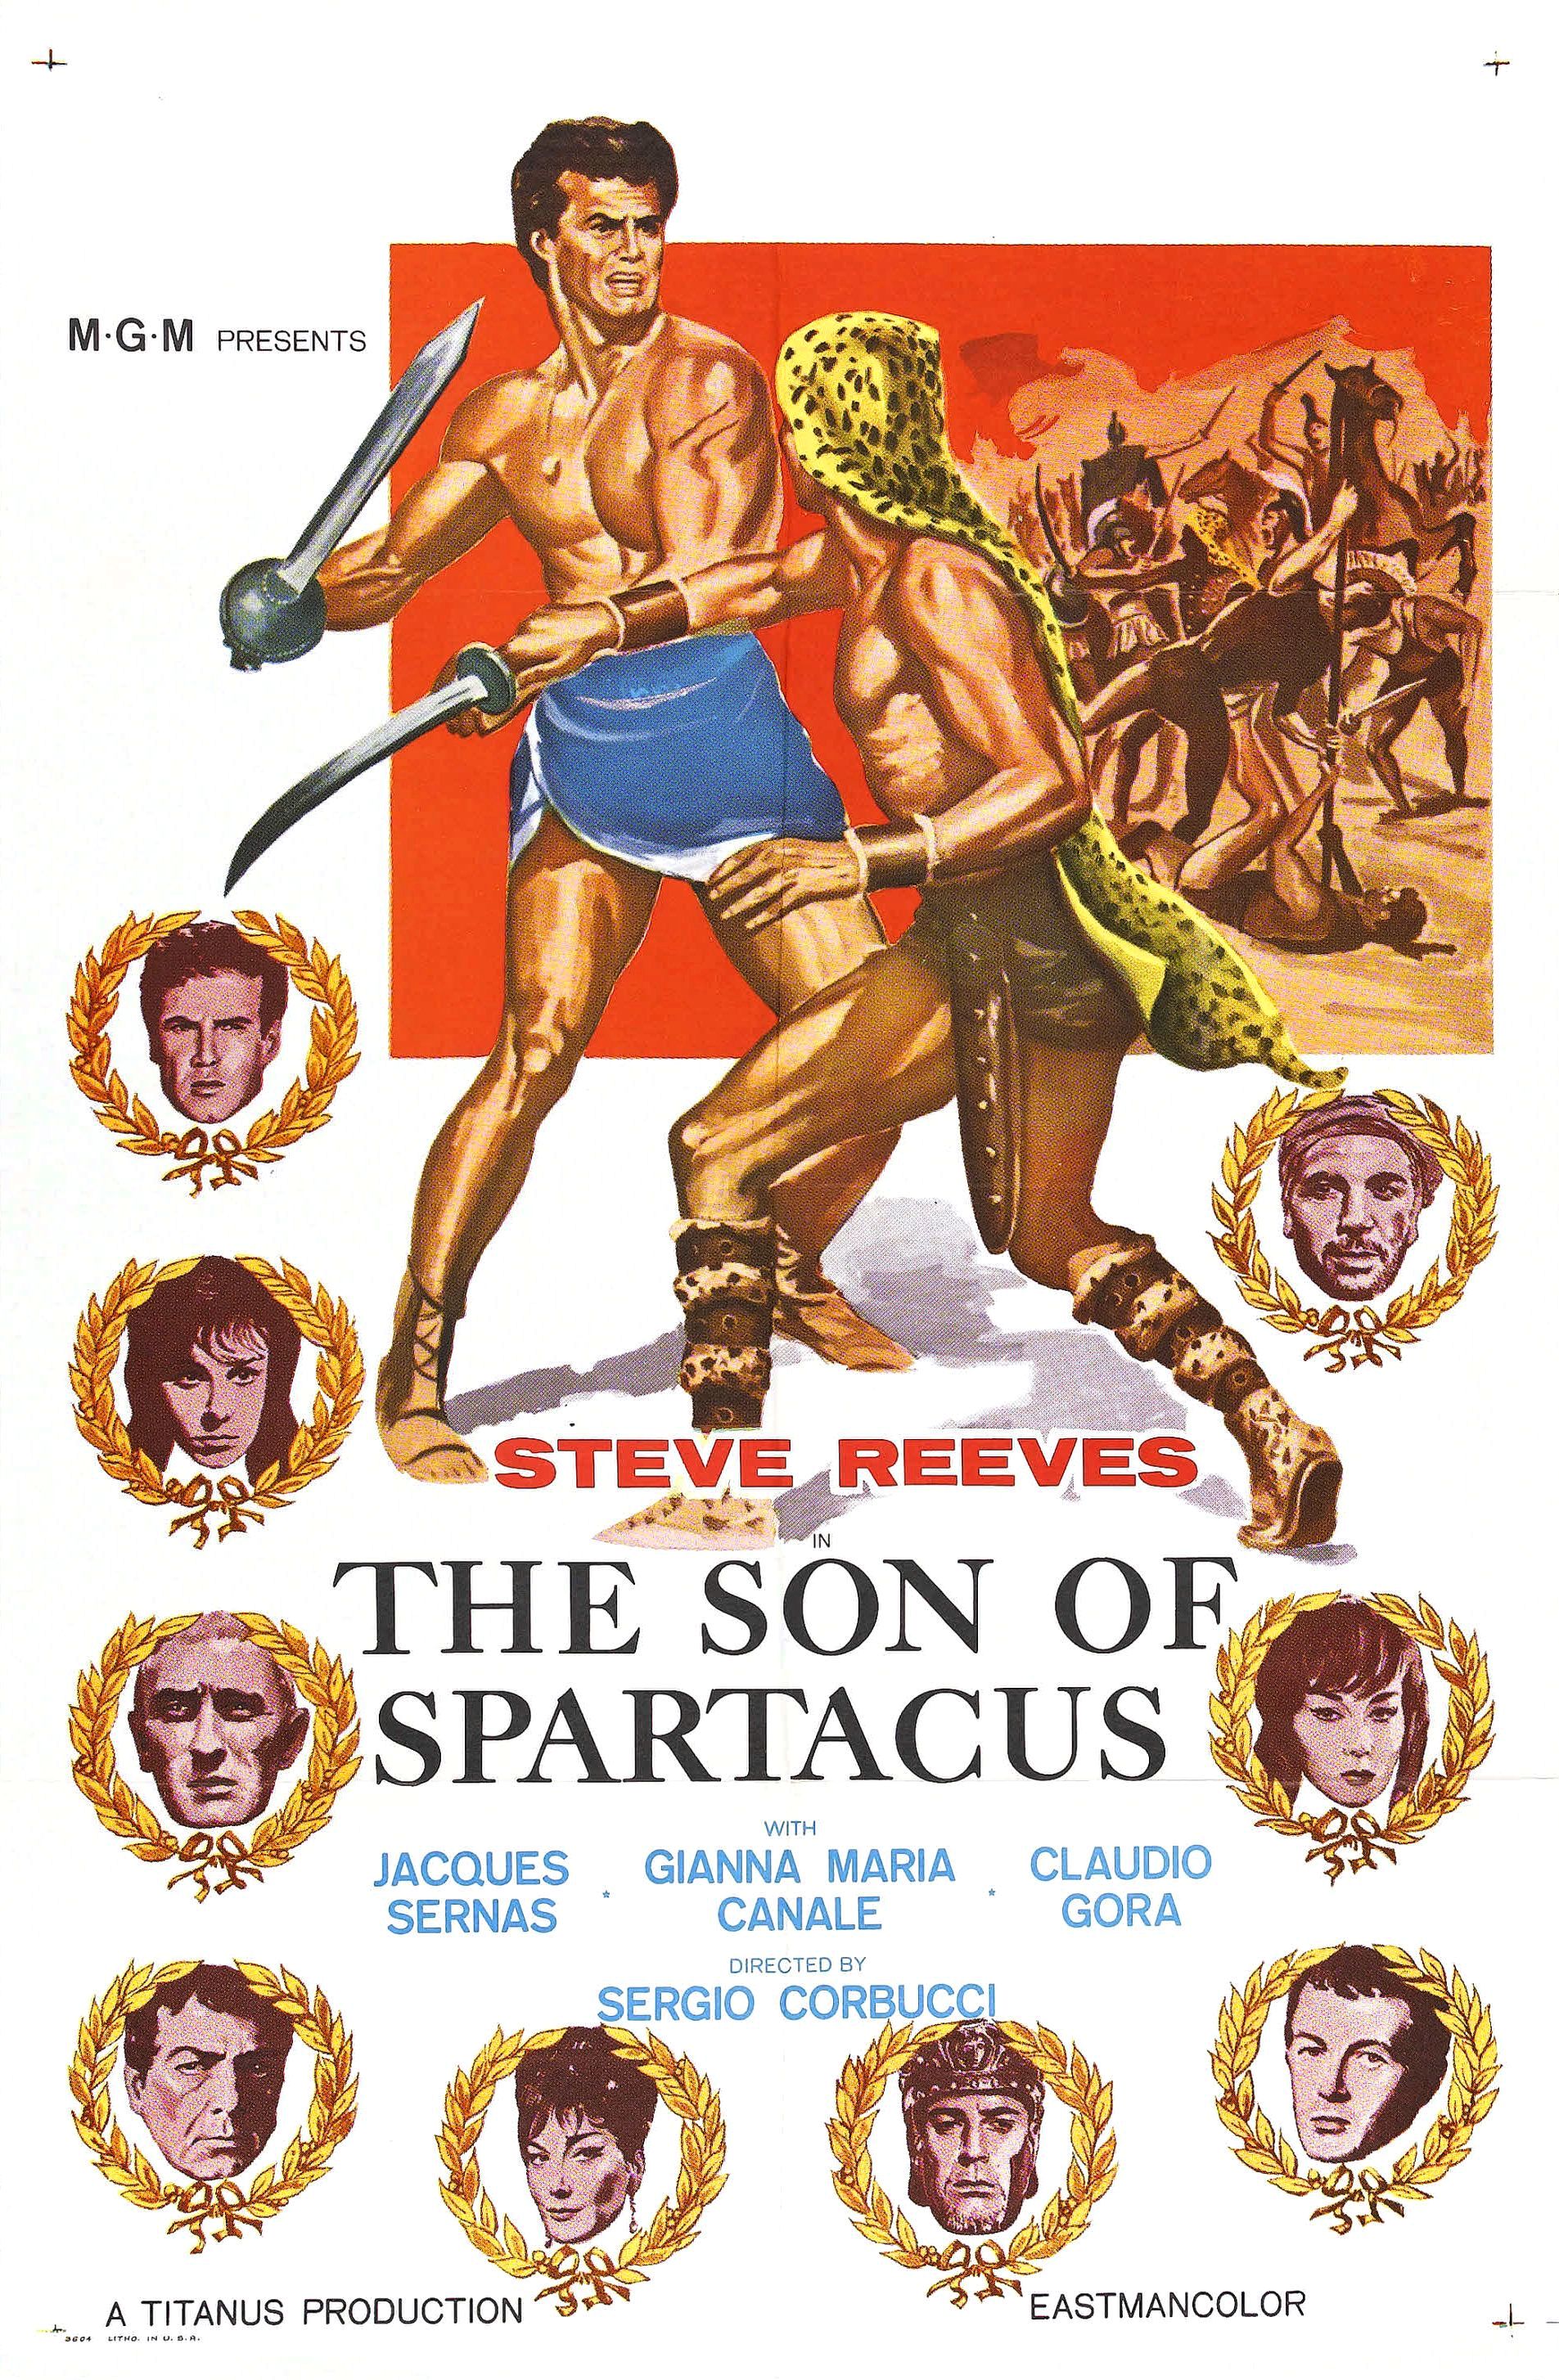 The Son of Spartacus (1962)